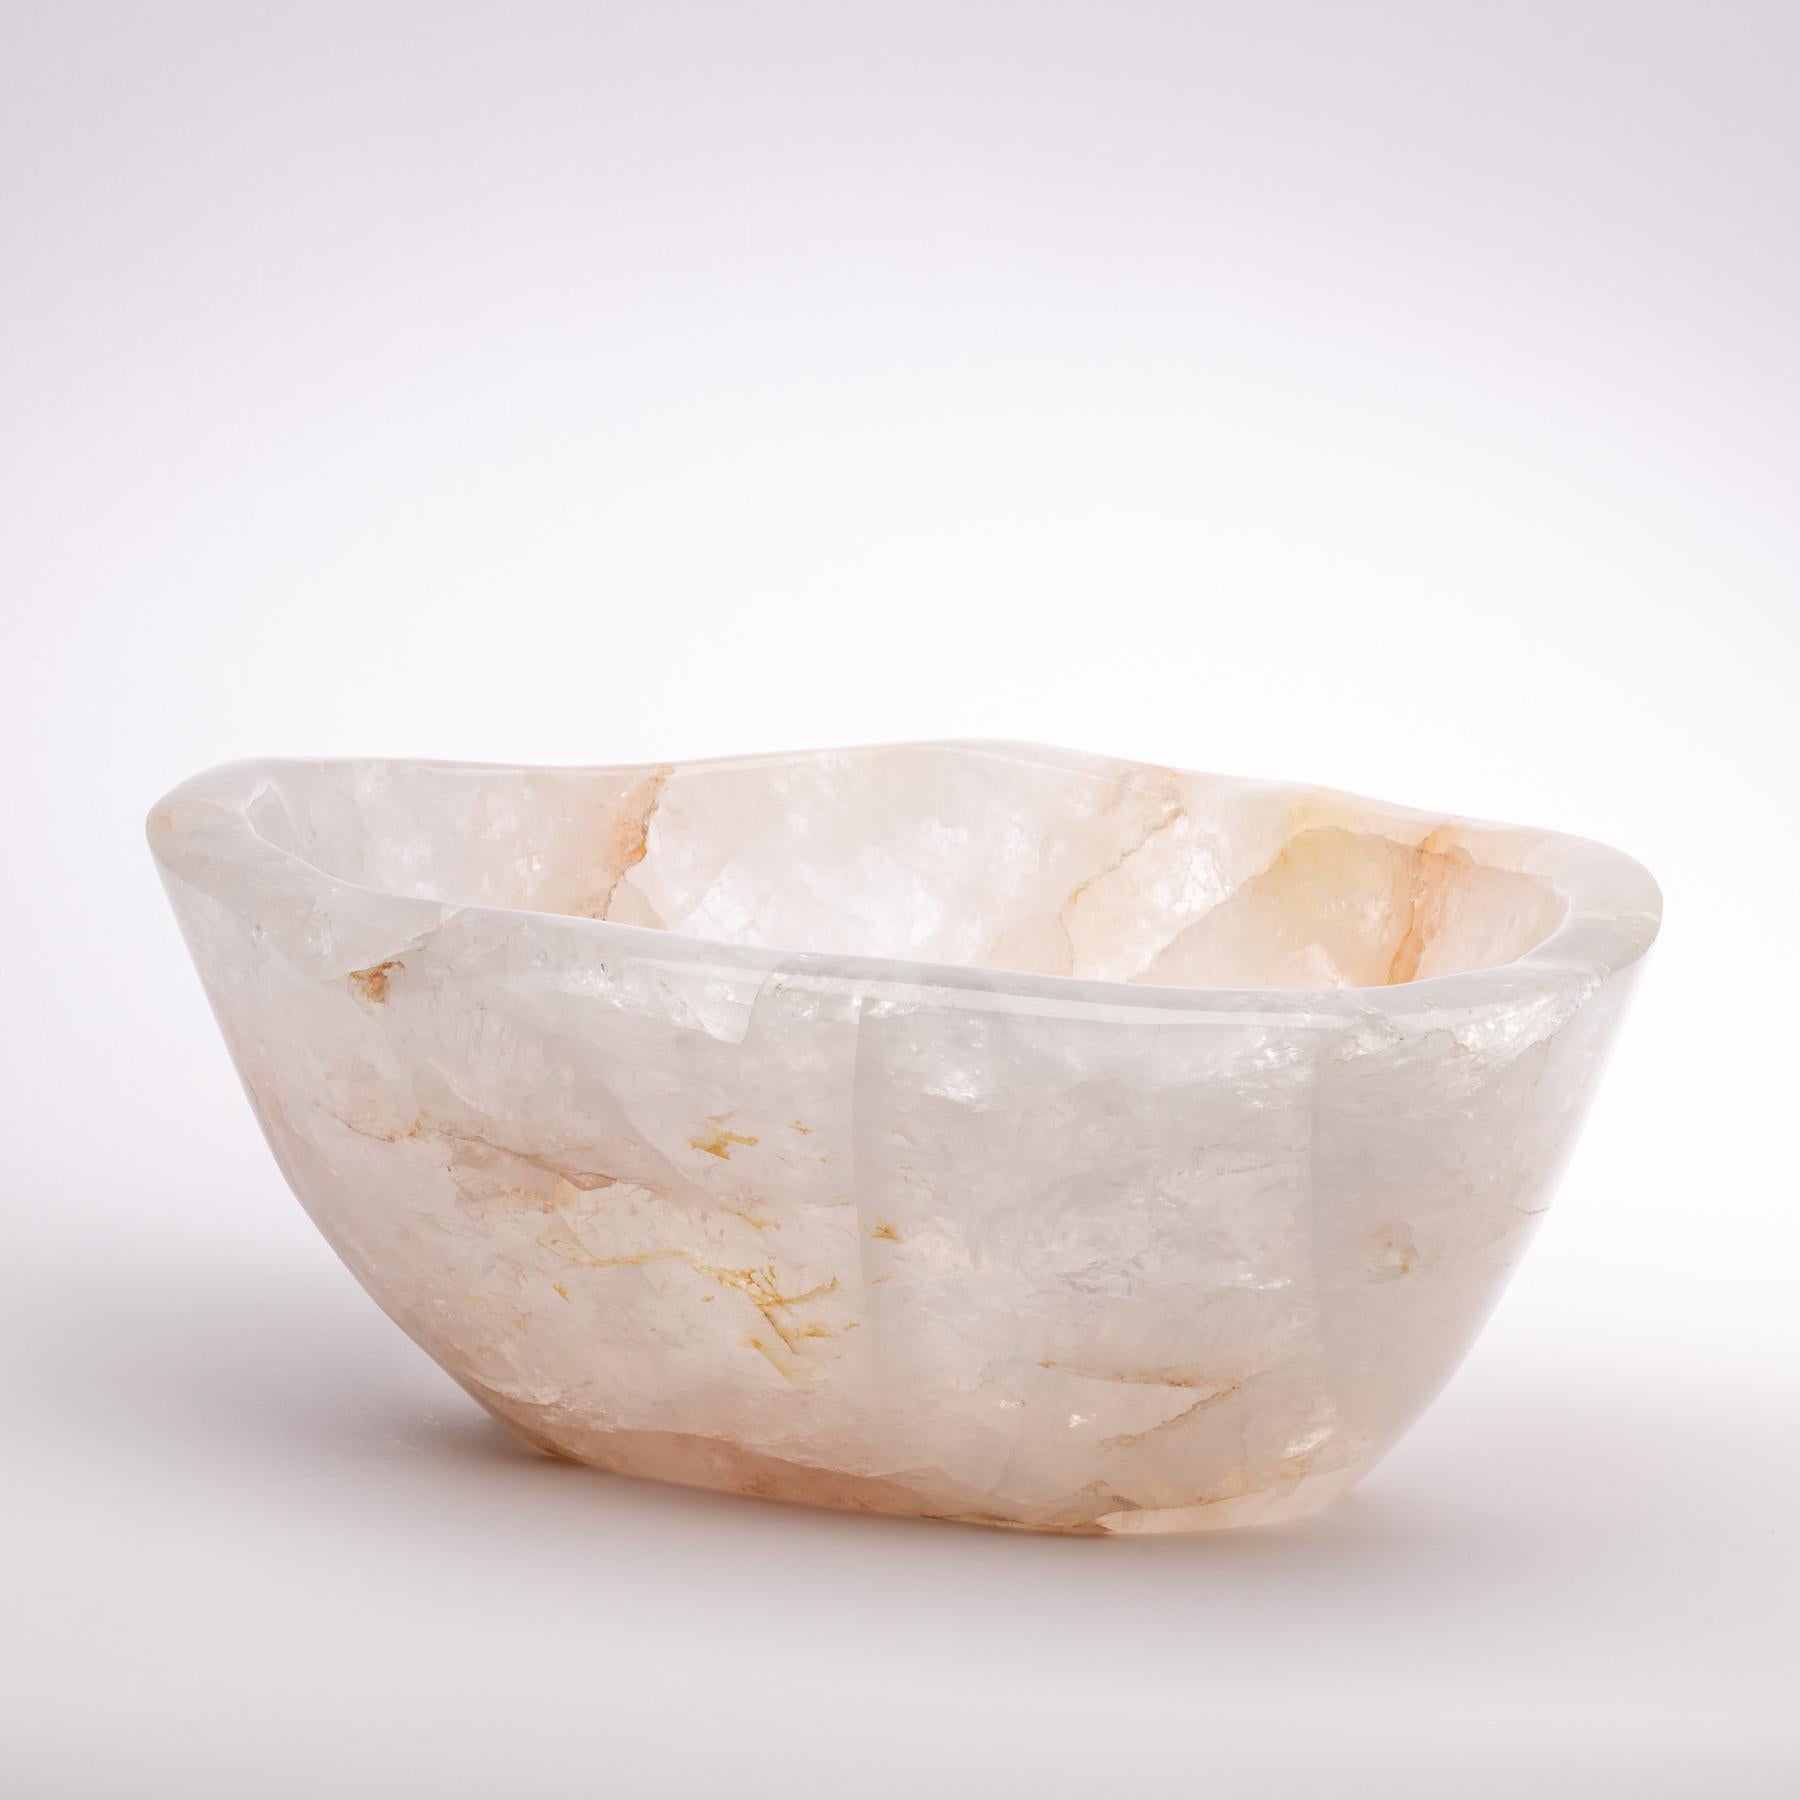 Large clear quartz bowl from Madagascar perfect for wine and champagne cooler.